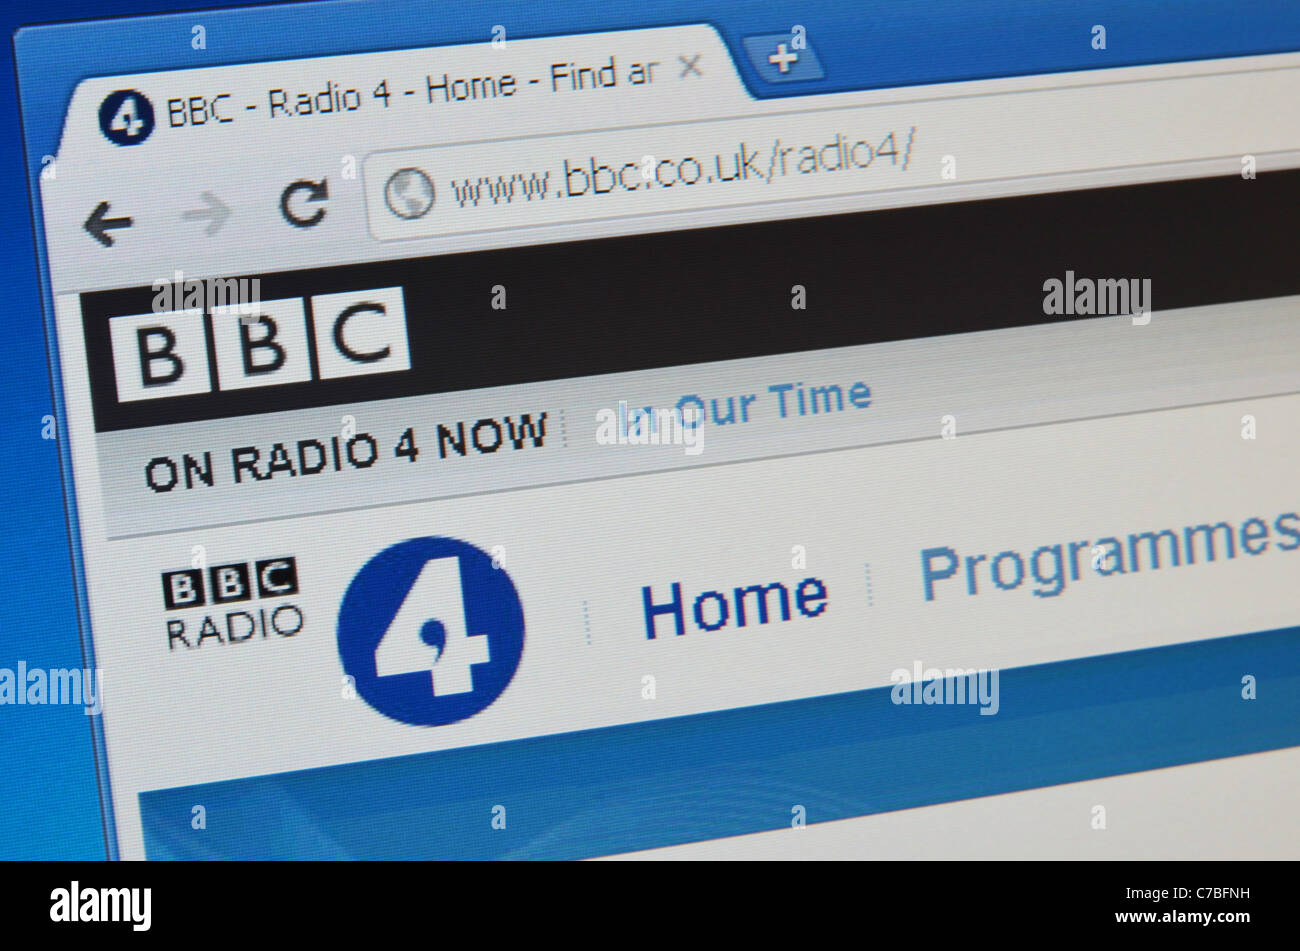 Bbc Radio 4 High Resolution Stock Photography and Images - Alamy